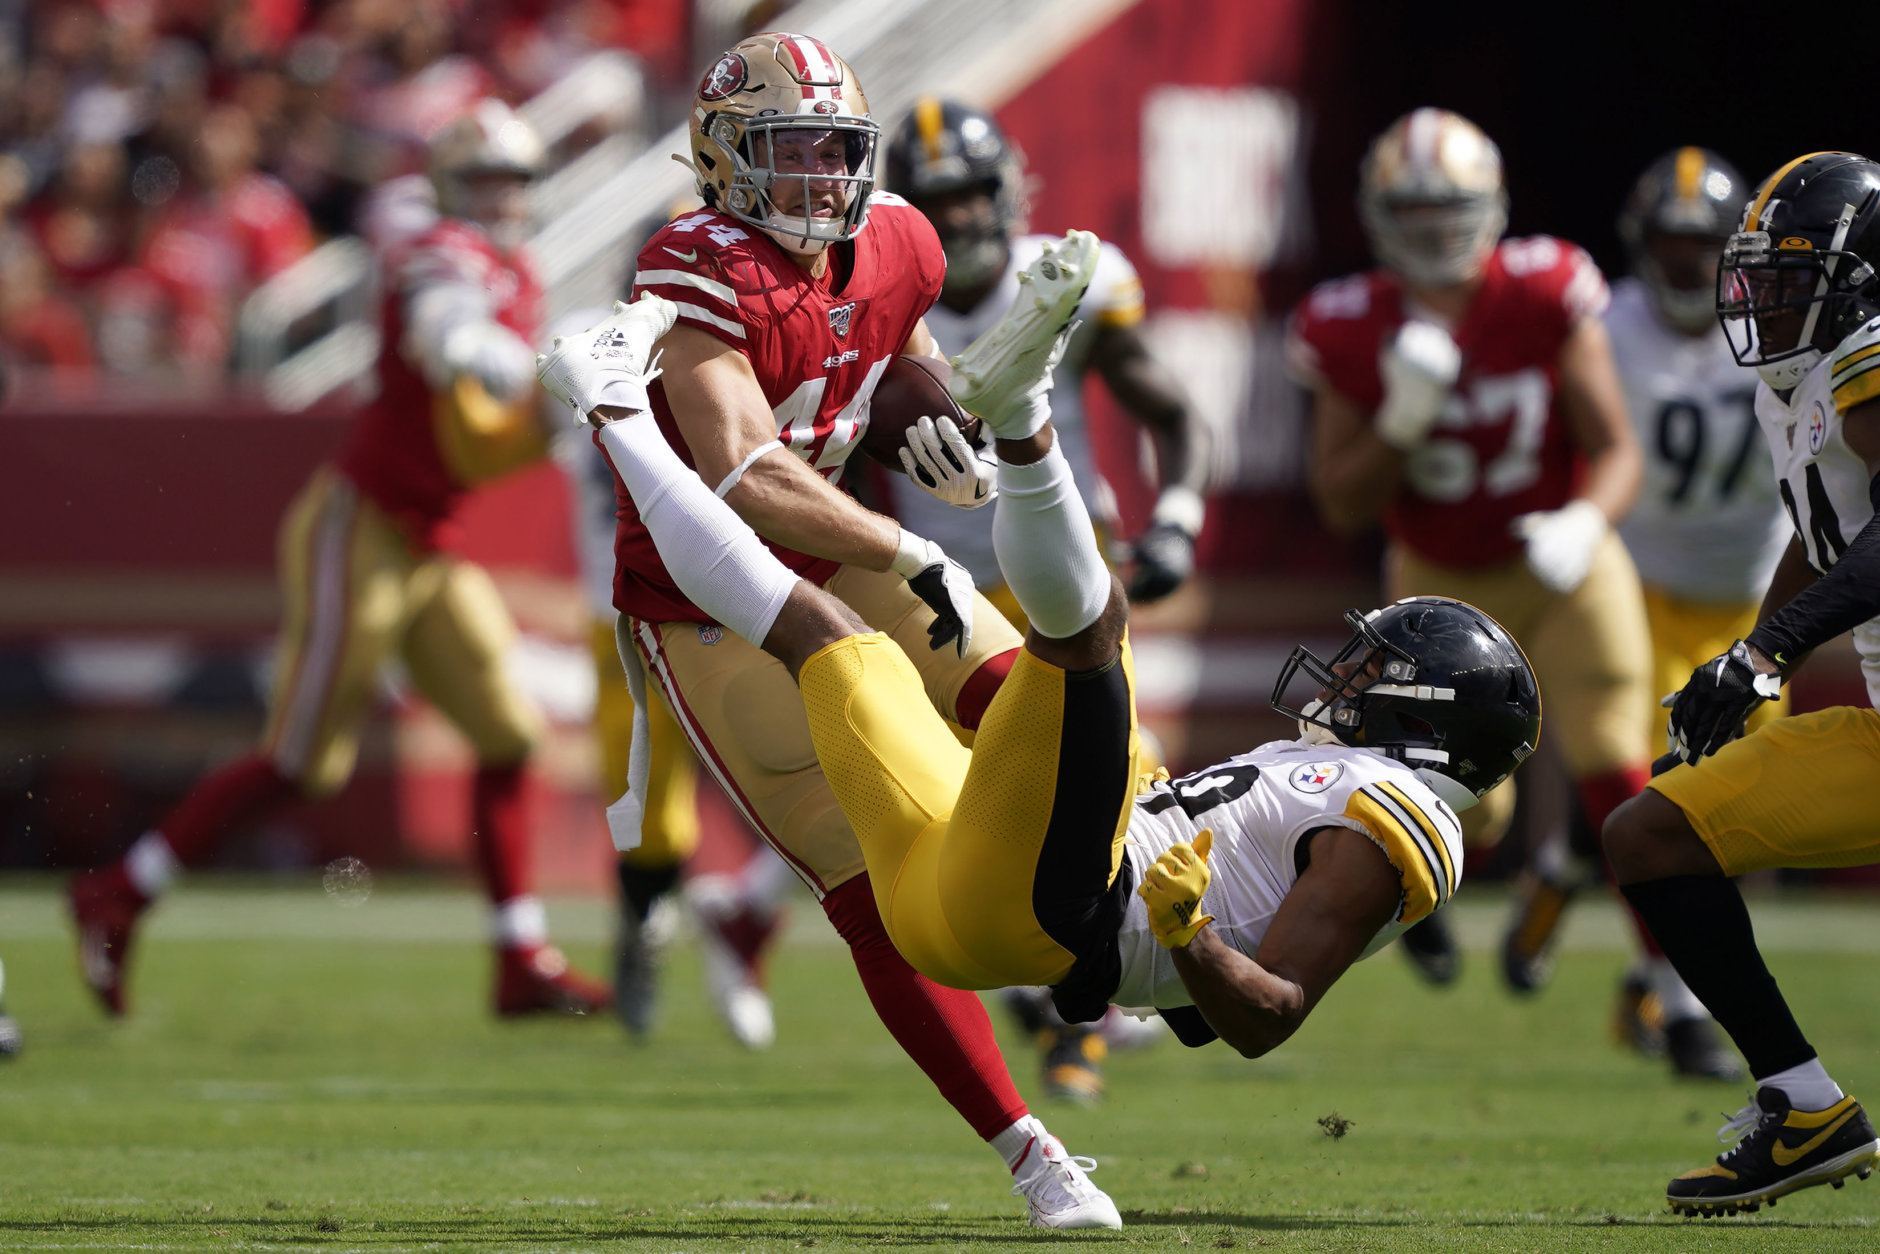 <p><b><i>Steelers 20</i></b><br />
<b><i>49ers 24</i></b></p>
<p>It&#8217;s not often a team&#8217;s turnovers (5) outnumbers its margin of victory but San Fran survived the sloppiest game of the season yet to lock up their first 3-0 start in 21 years, while Pittsburgh continued its <a href="https://deadspin.com/heres-a-really-bizarre-stat-about-the-steelers-1830710641" target="_blank" rel="noopener" data-saferedirecturl="https://www.google.com/url?q=https://deadspin.com/heres-a-really-bizarre-stat-about-the-steelers-1830710641&amp;source=gmail&amp;ust=1569294743340000&amp;usg=AFQjCNGT8oENKOVqBaSe-M9CVSLPn3Iz1Q">awful history on the West Coast</a>. If the Steelers can&#8217;t beat the Bengals at home in next Monday&#8217;s primetime battle of winless teams, it could be the low point of a really long season in the Steel City.</p>
